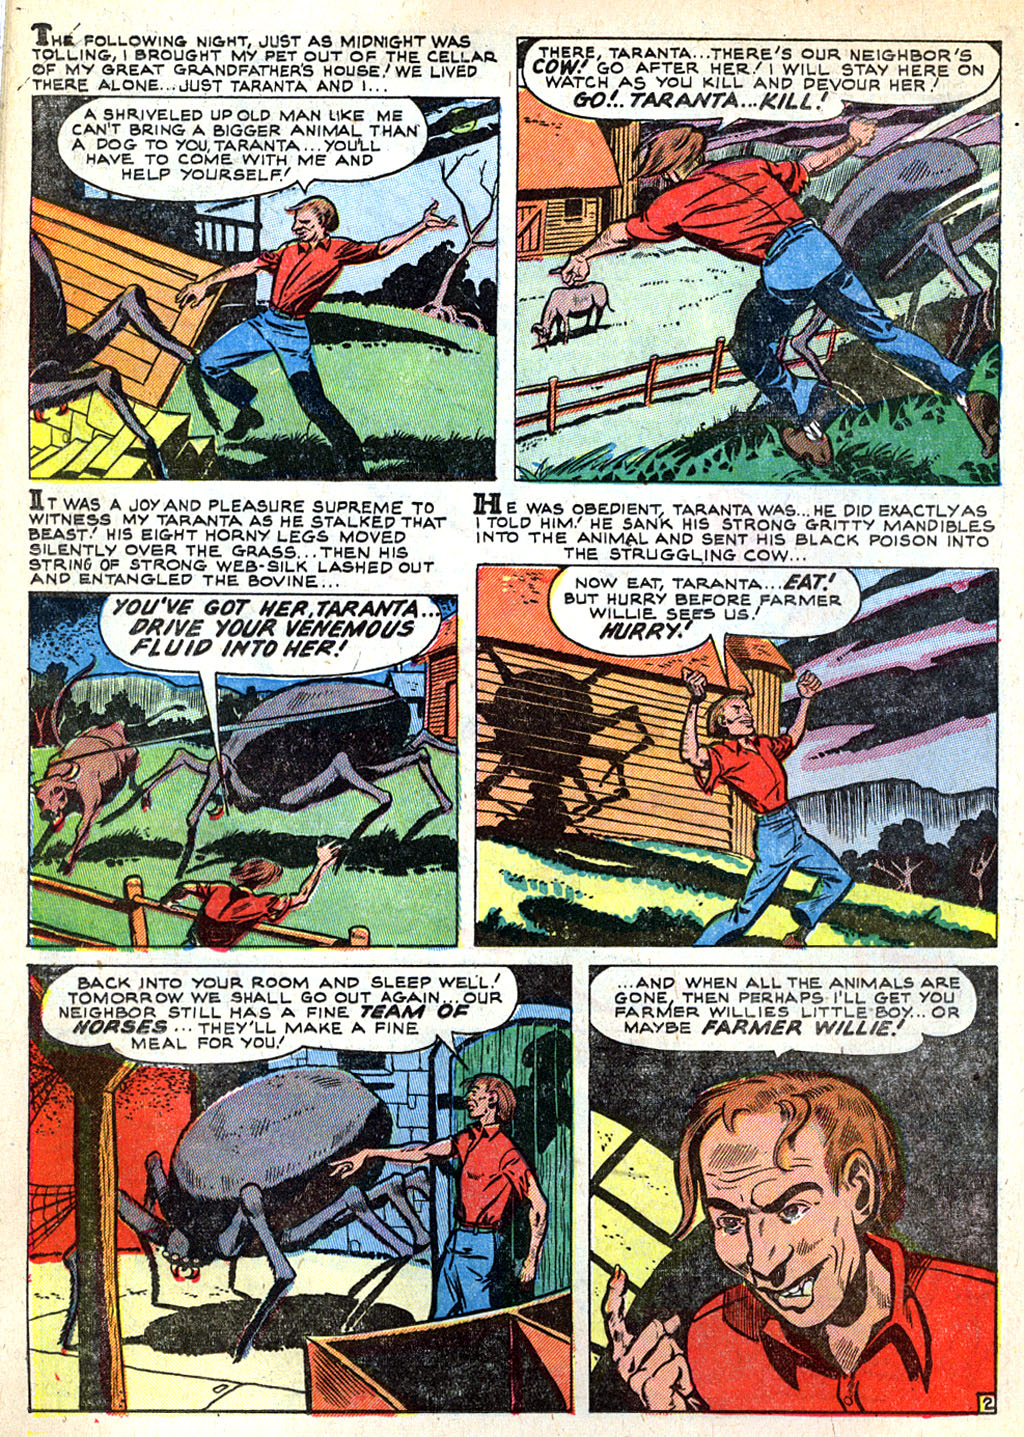 Marvel Tales (1949) 101 Page 11